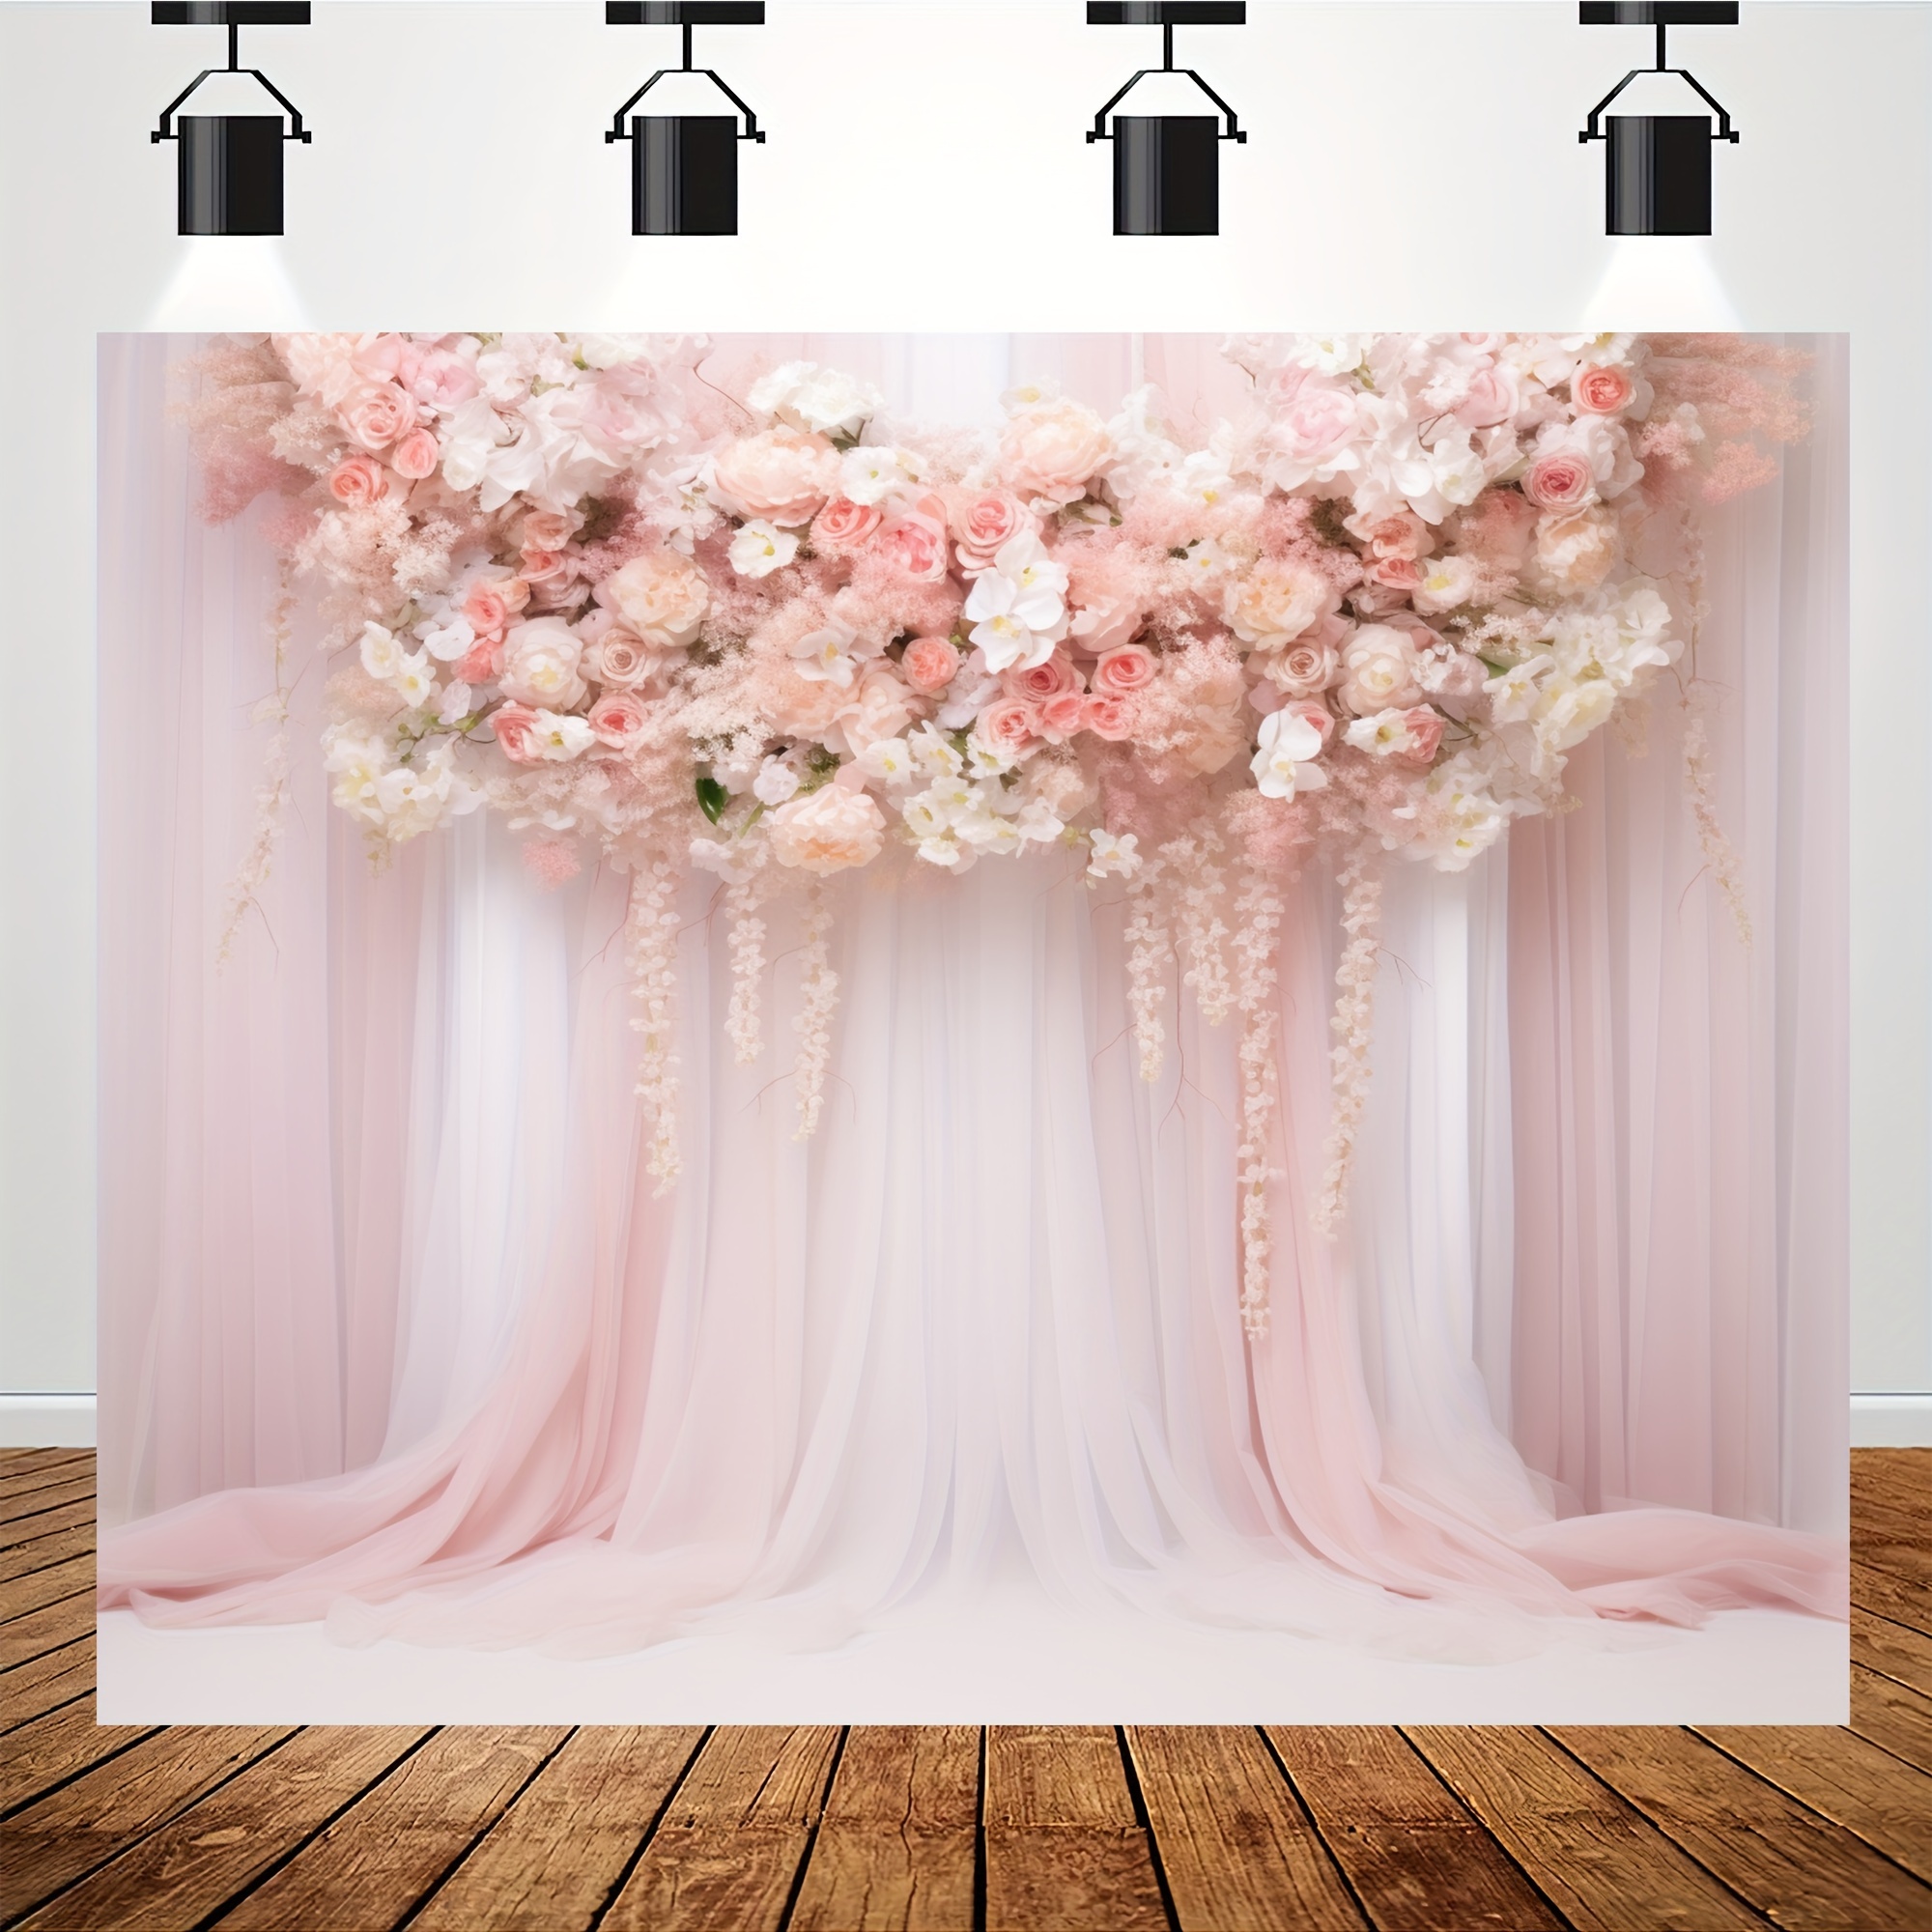 The beautiful backdrop with pink fabric decoration with various